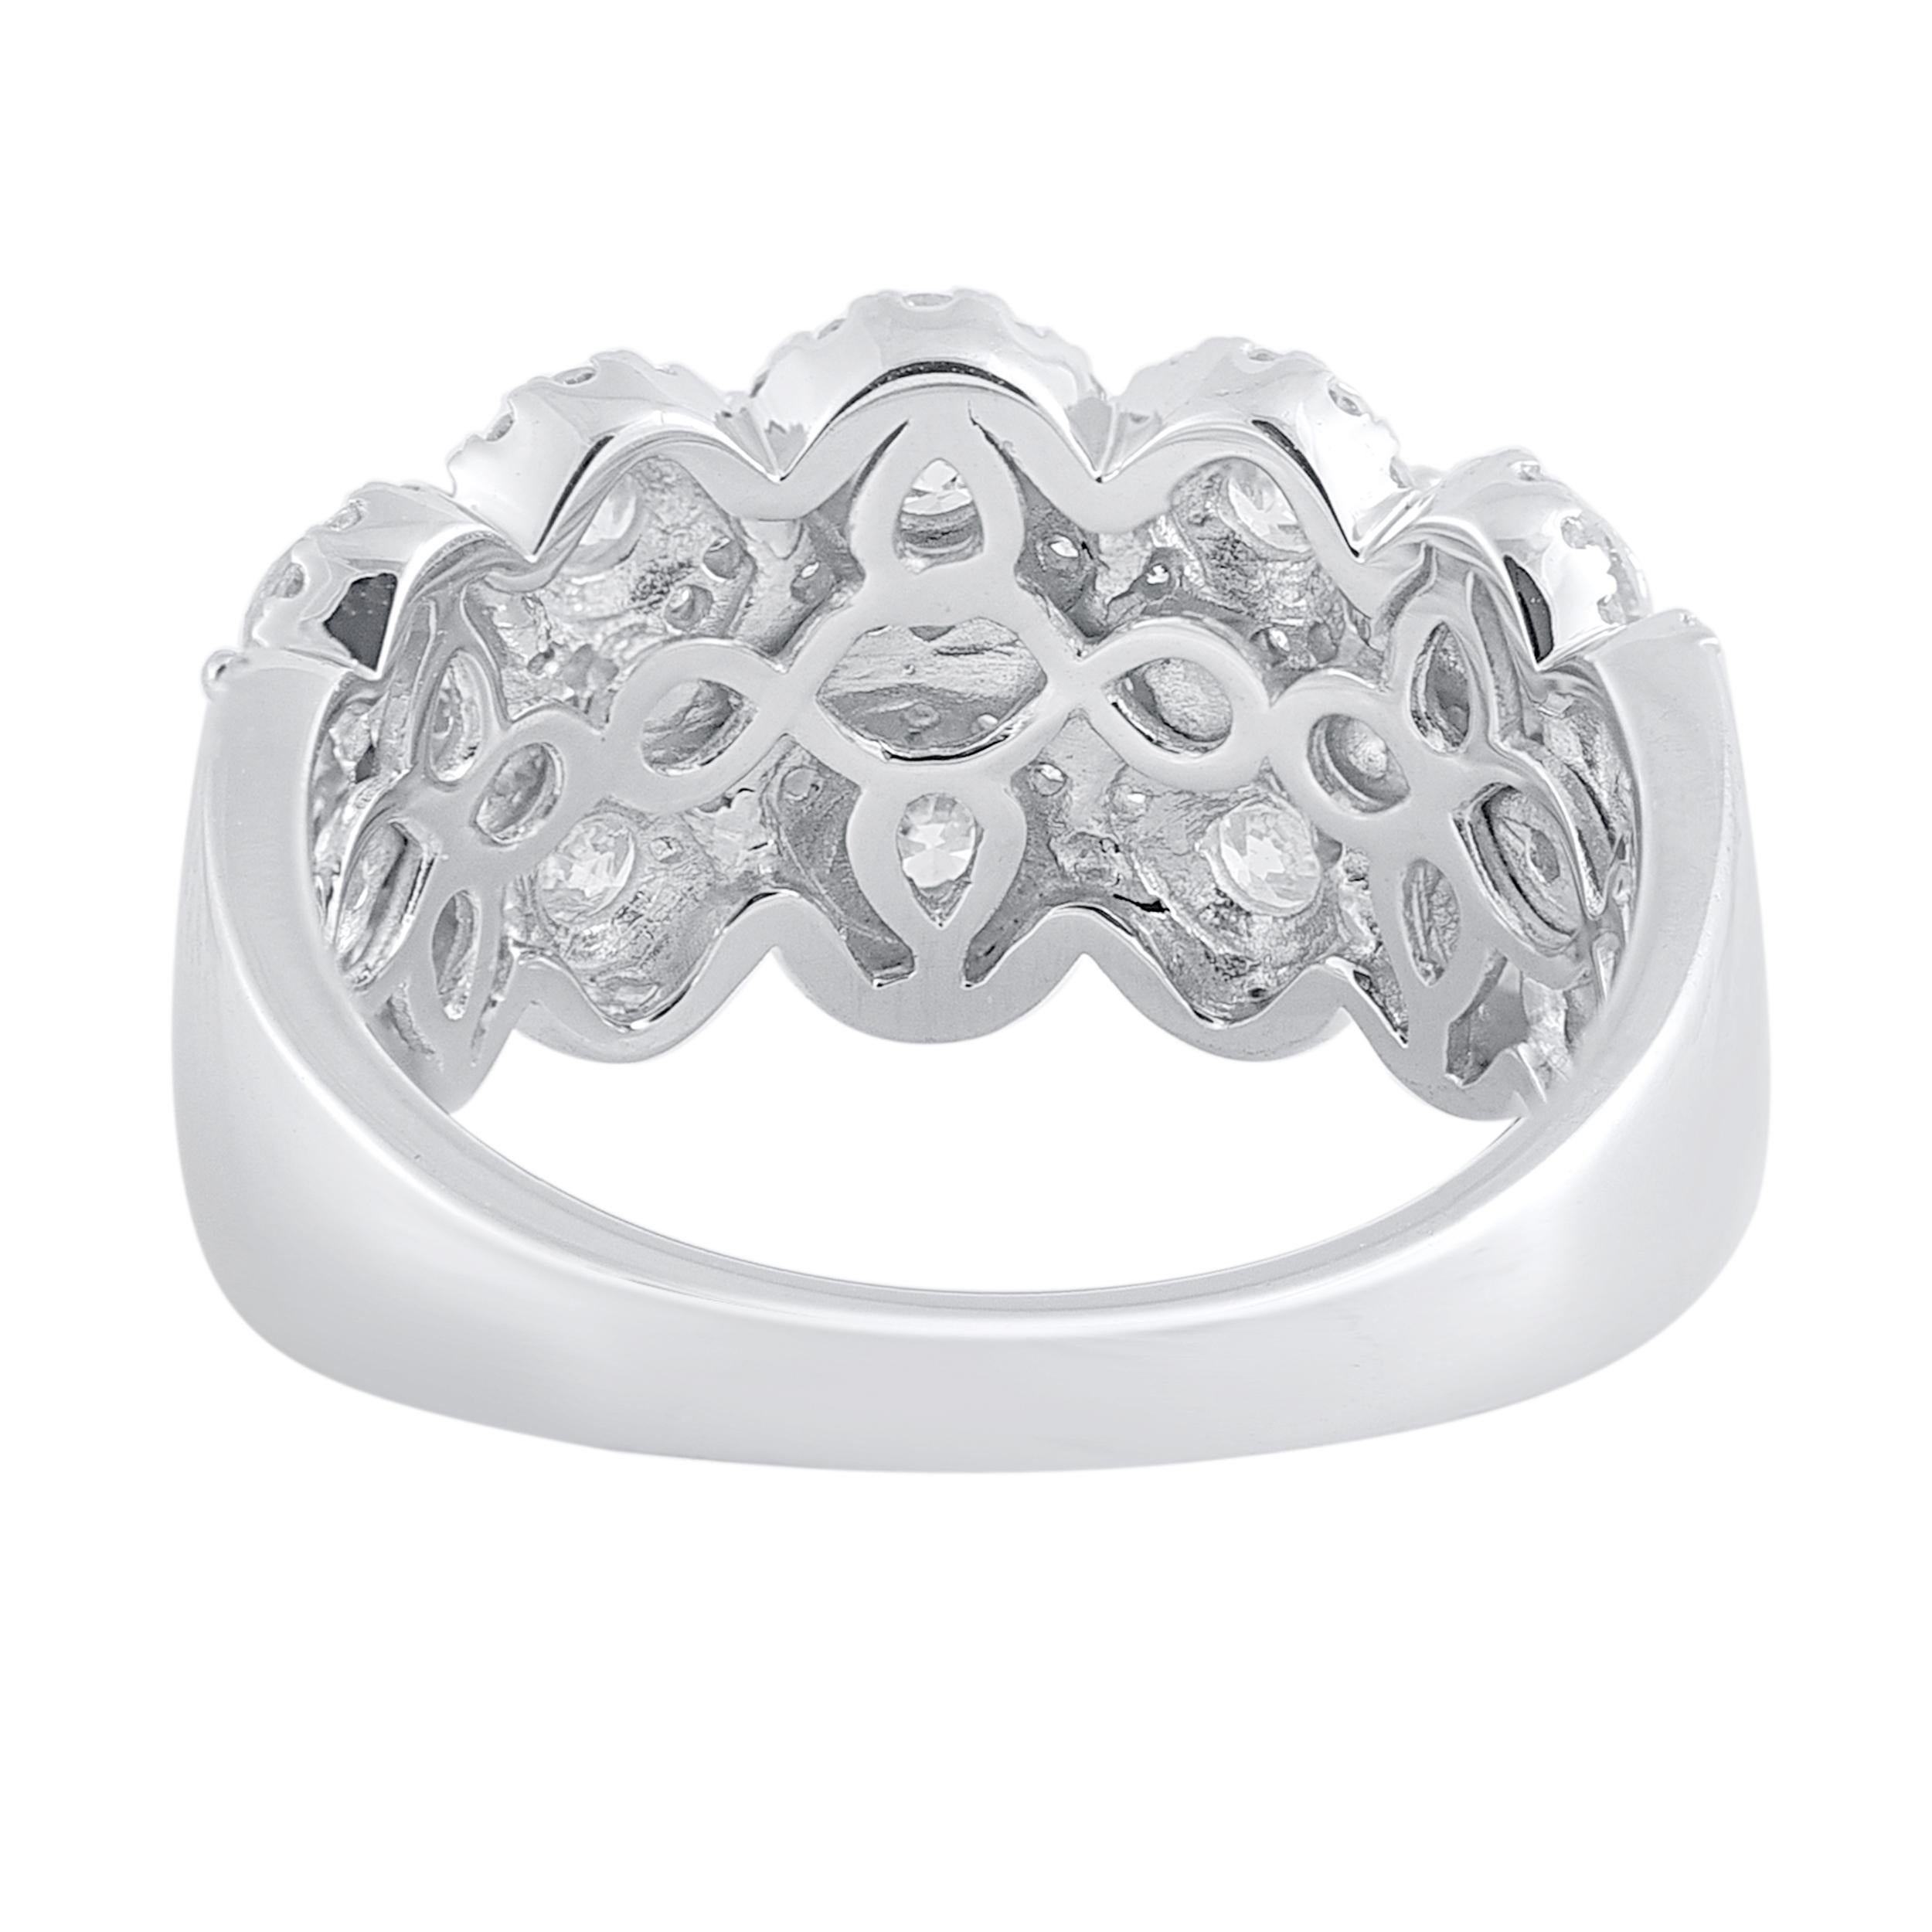 Truly exquisite, this diamond engagement band is sure to be admired for the inherent classic beauty and elegance within its design. This ring is beautifully crafted in 14 Karat white gold and embedded with 144 round brilliant cut and single cut